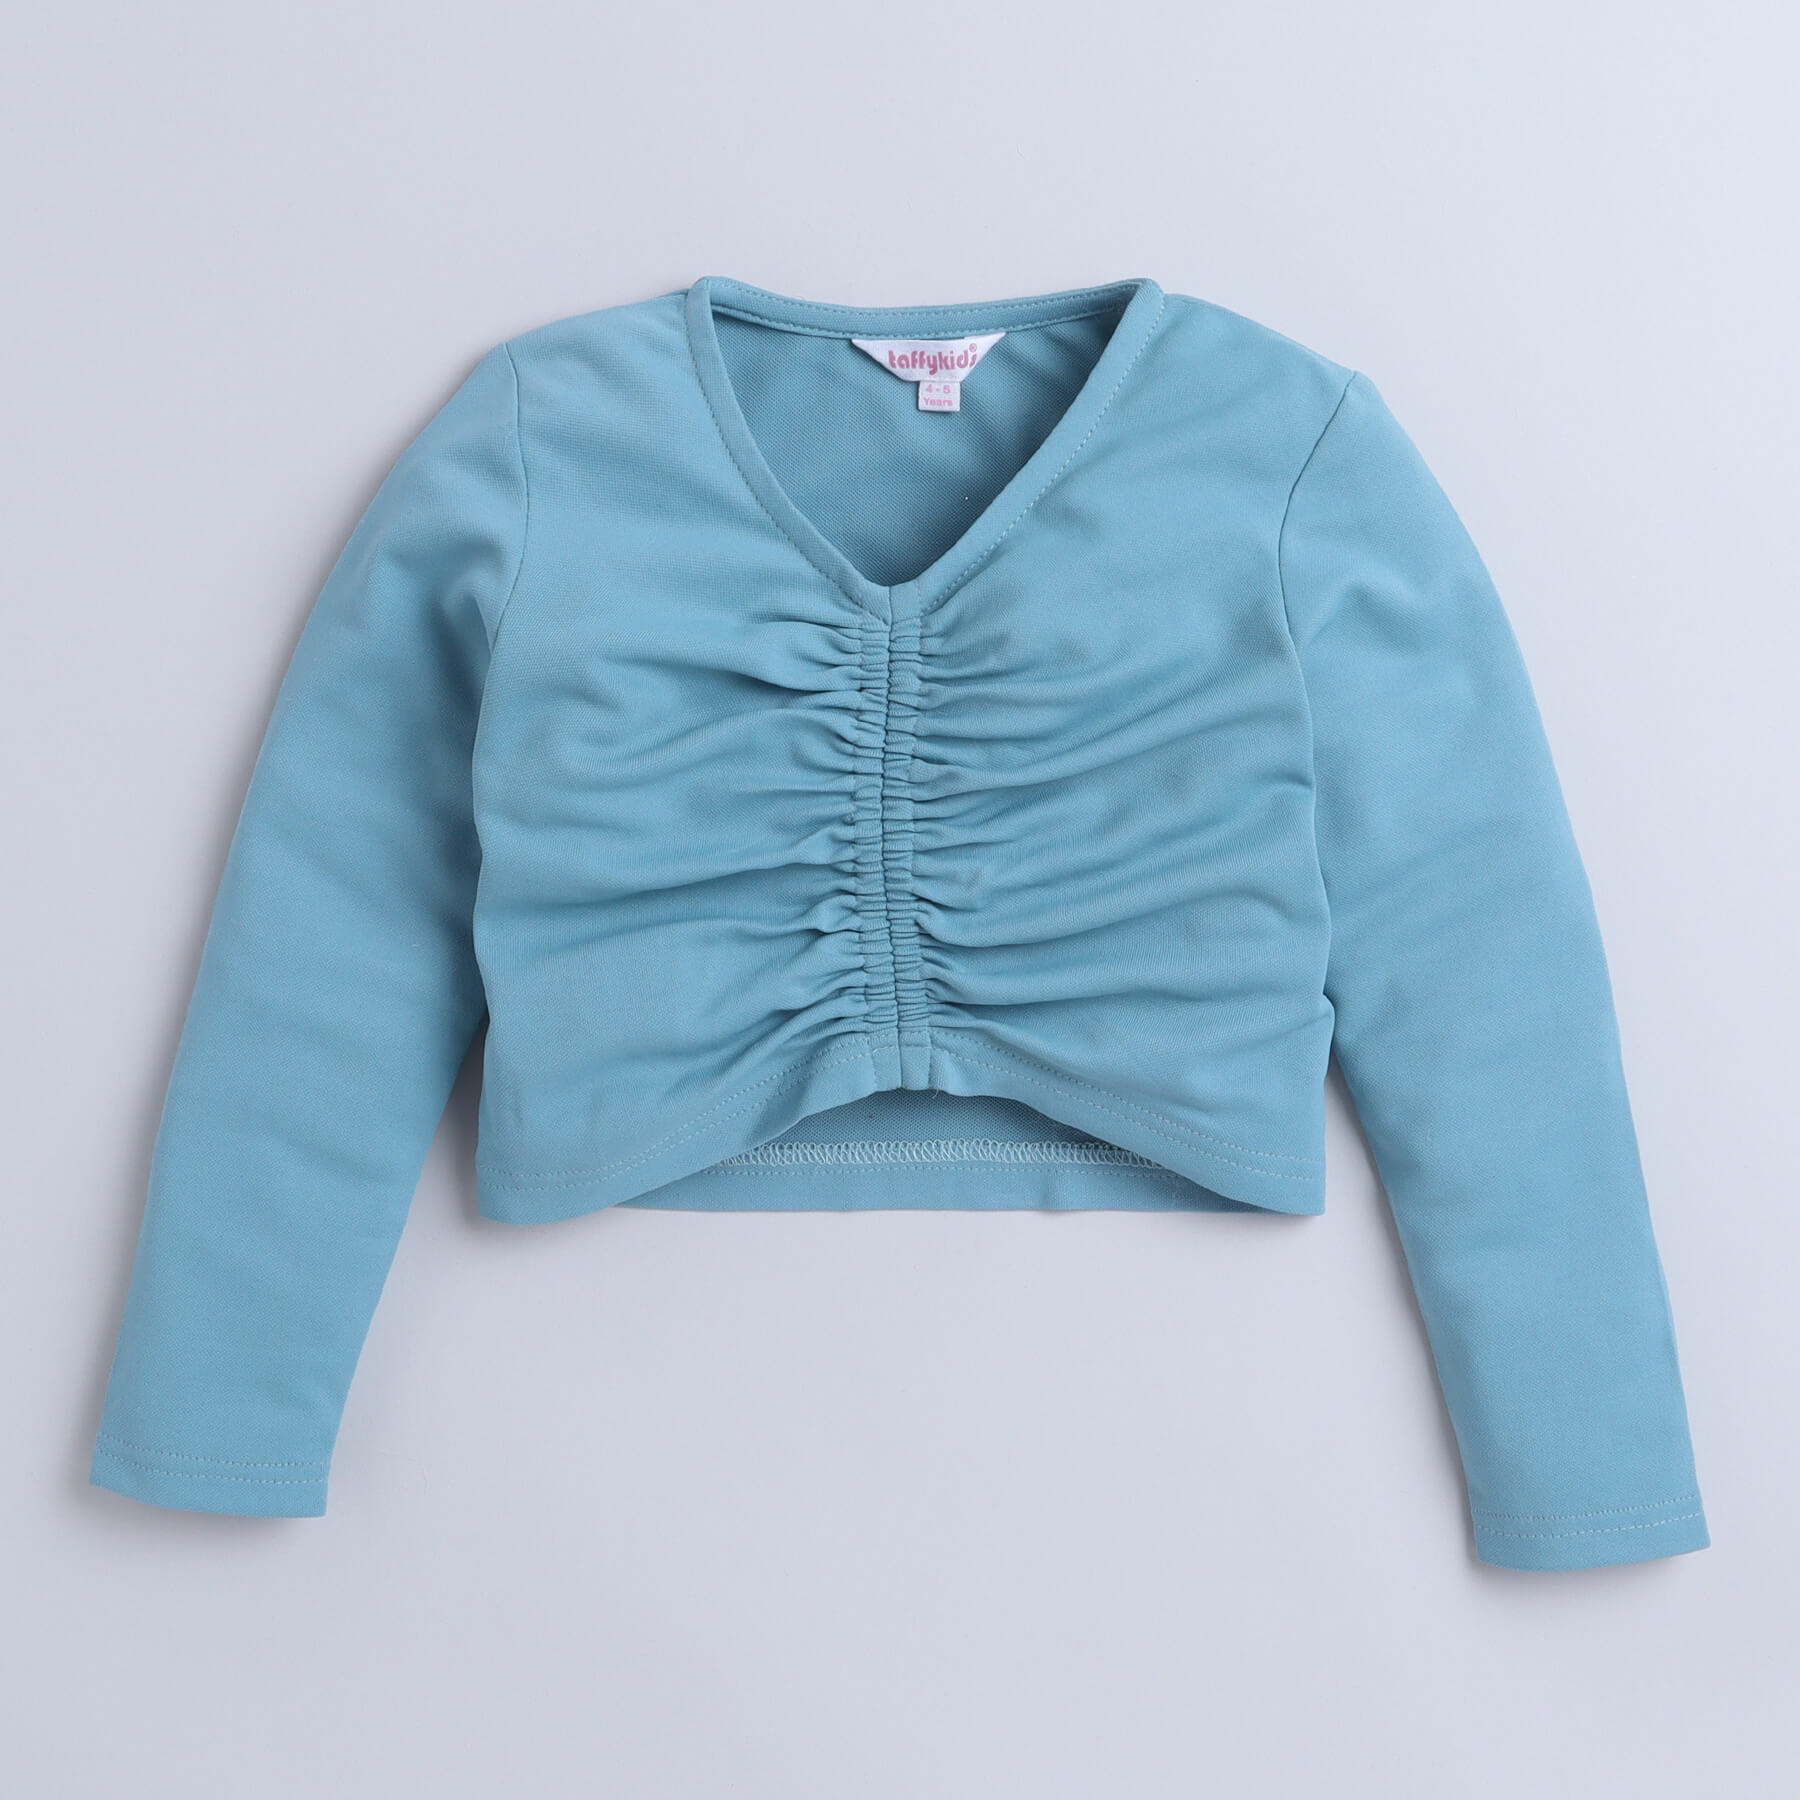 Taffykids Full sleeves front rushed crop top-Mint blue